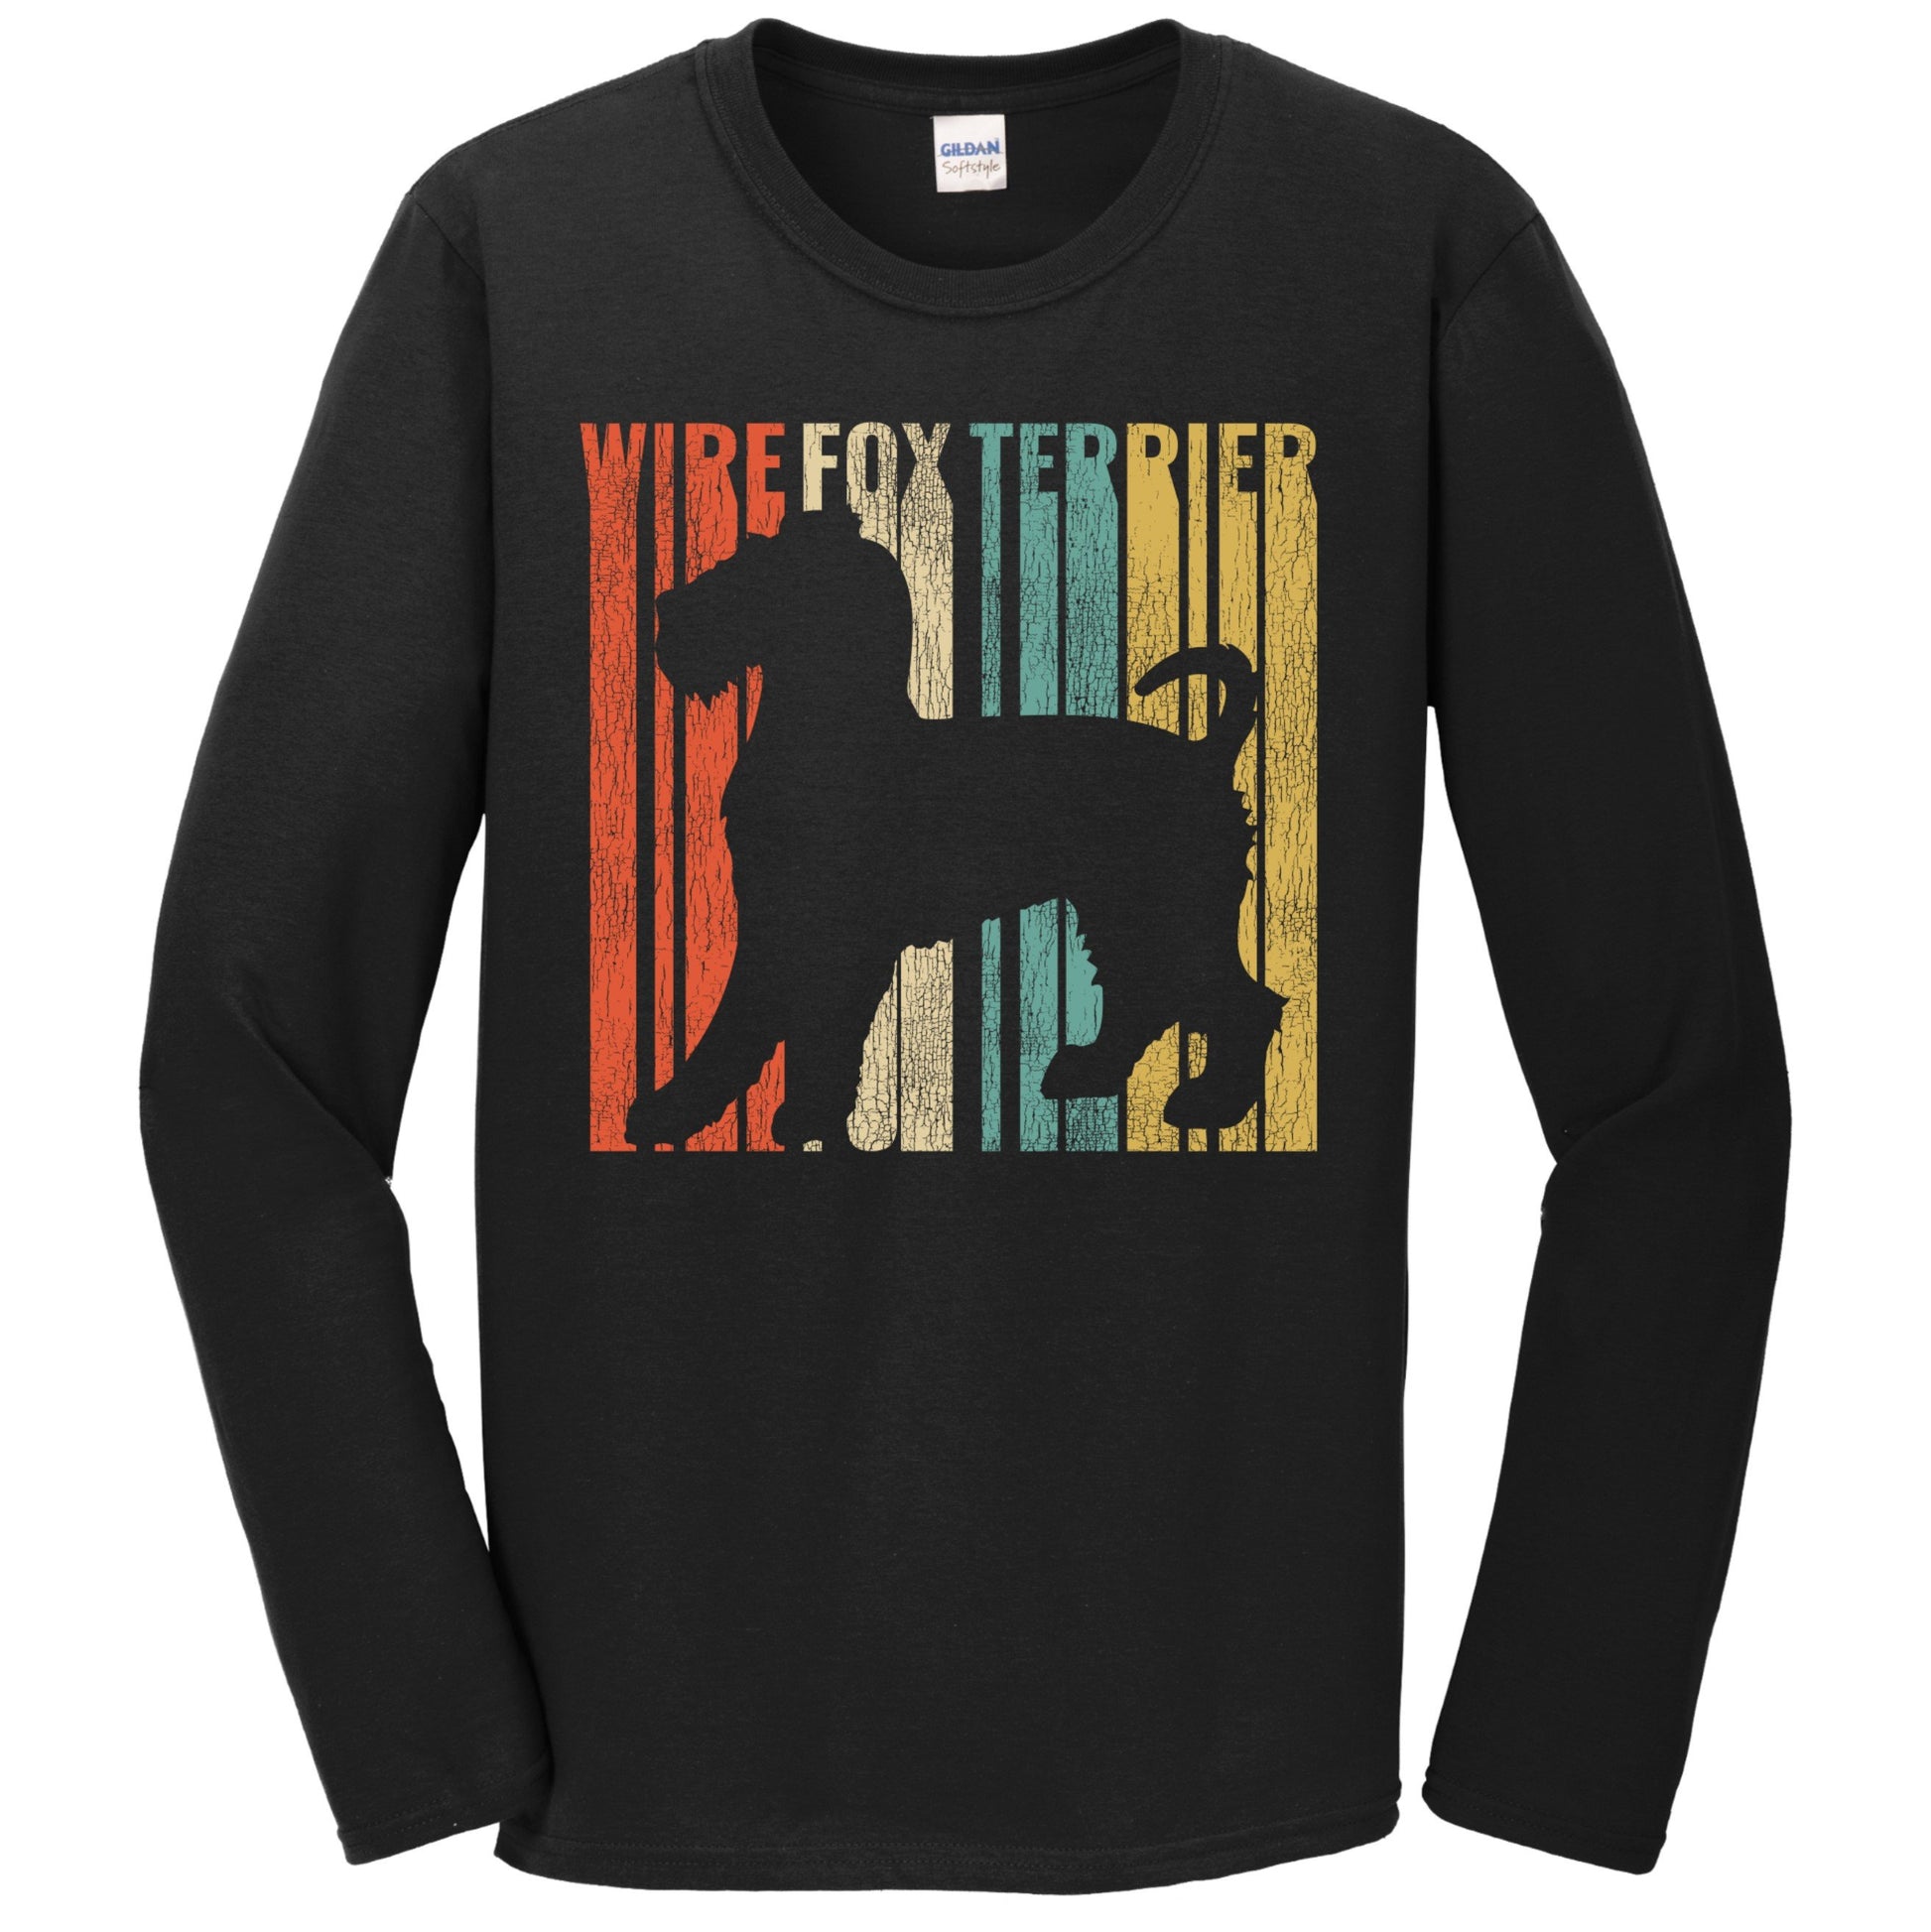 Retro 1970's Style Wire Fox Terrier Dog Silhouette Cracked Distressed Long Sleeve T-Shirt